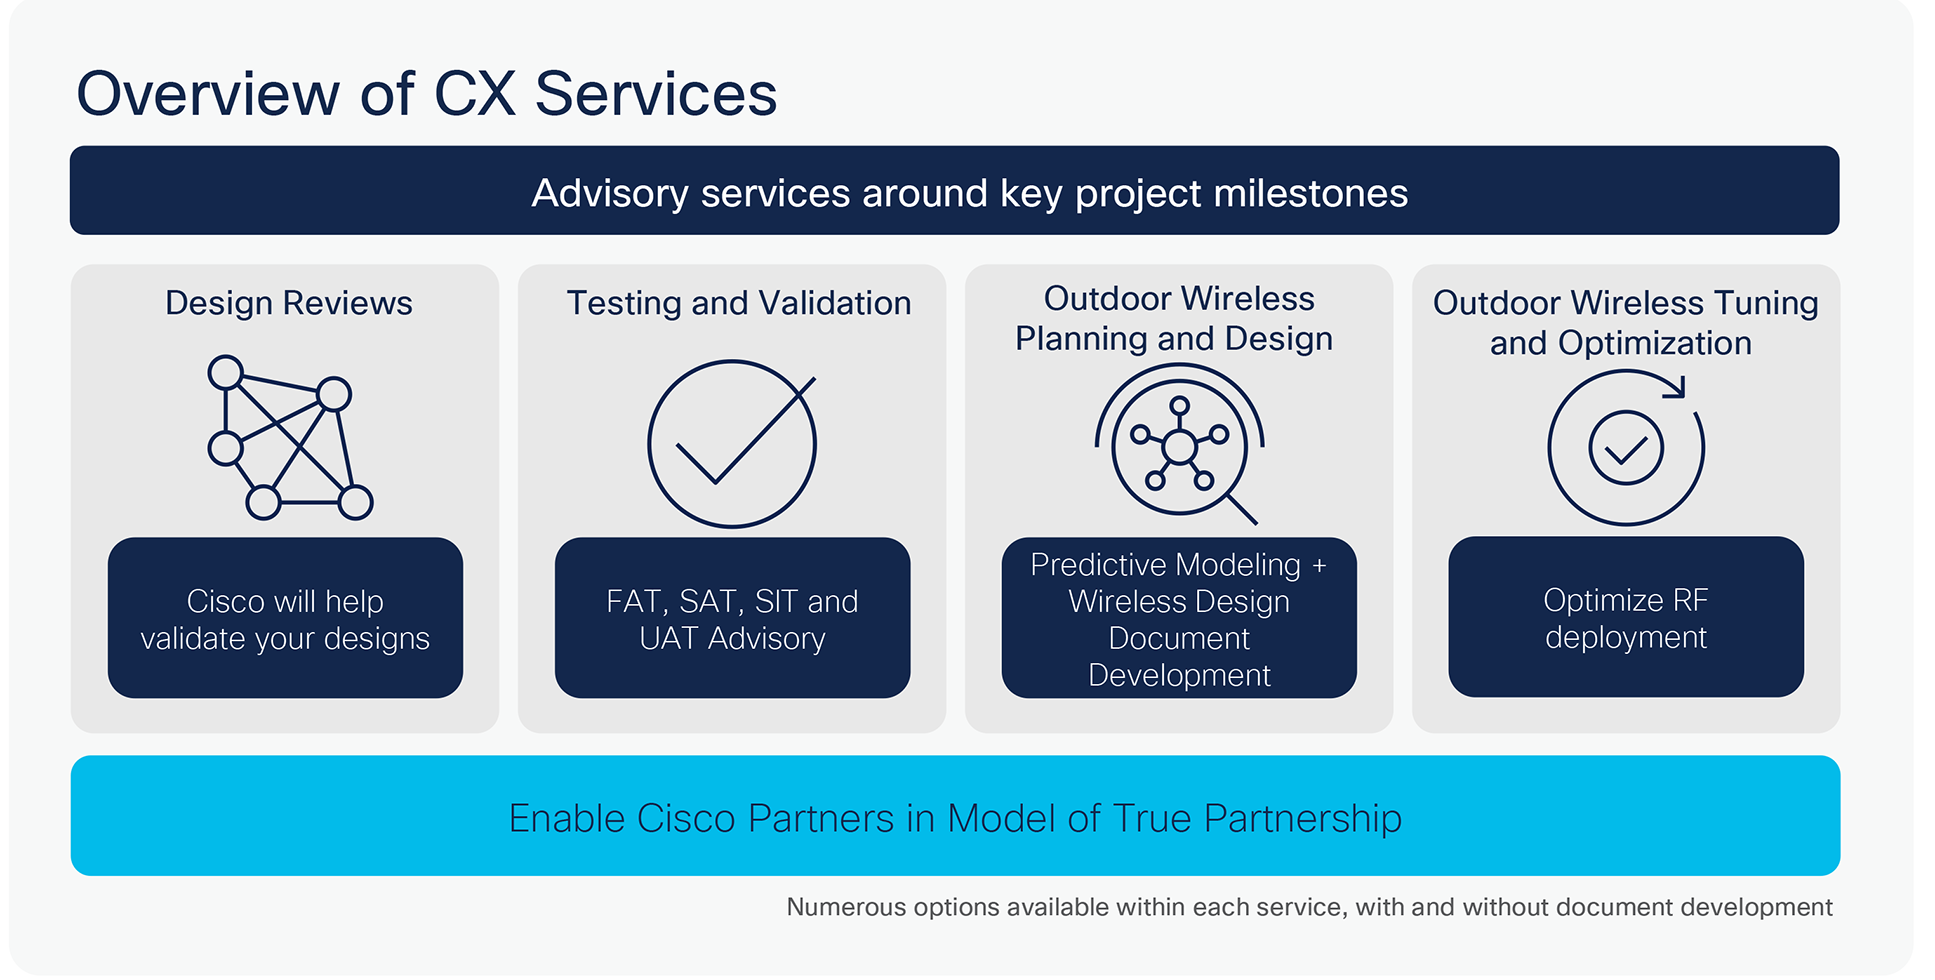 Overview of CX Services